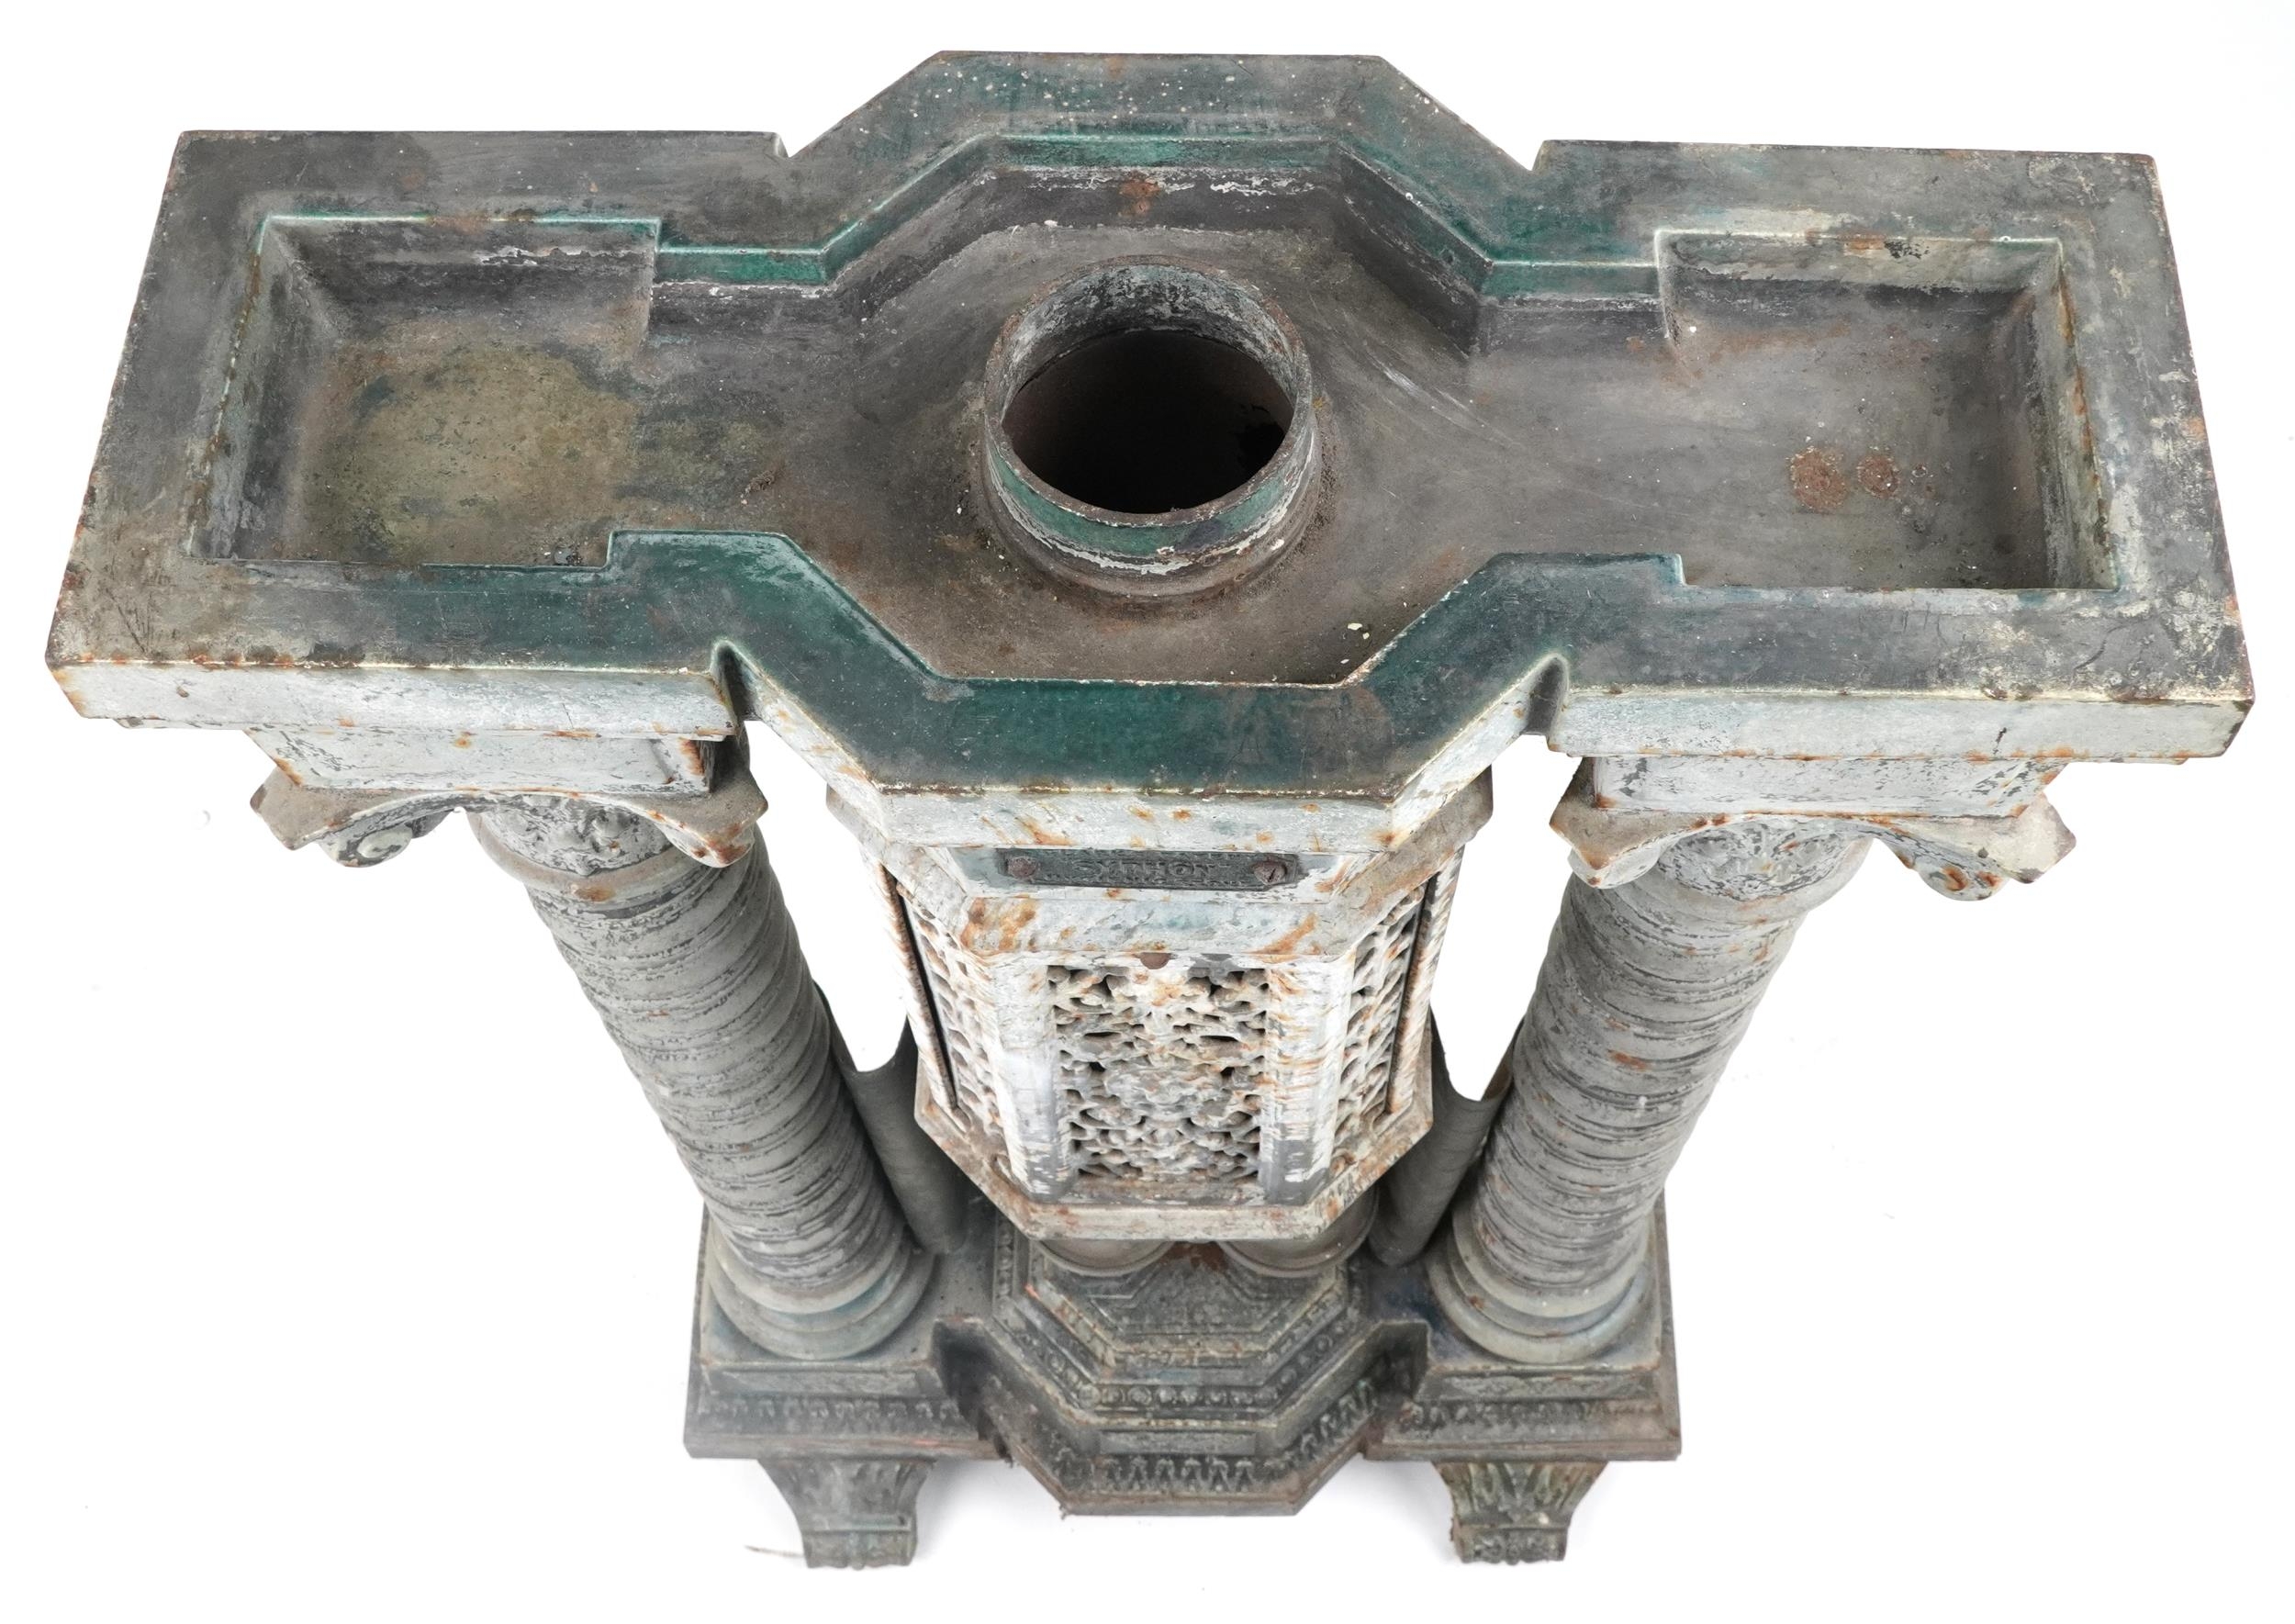 Victorian cast iron green enamelled Clark's patent Syphon Hygienic stove, 119 H x 64 W x 36 D - Image 2 of 4